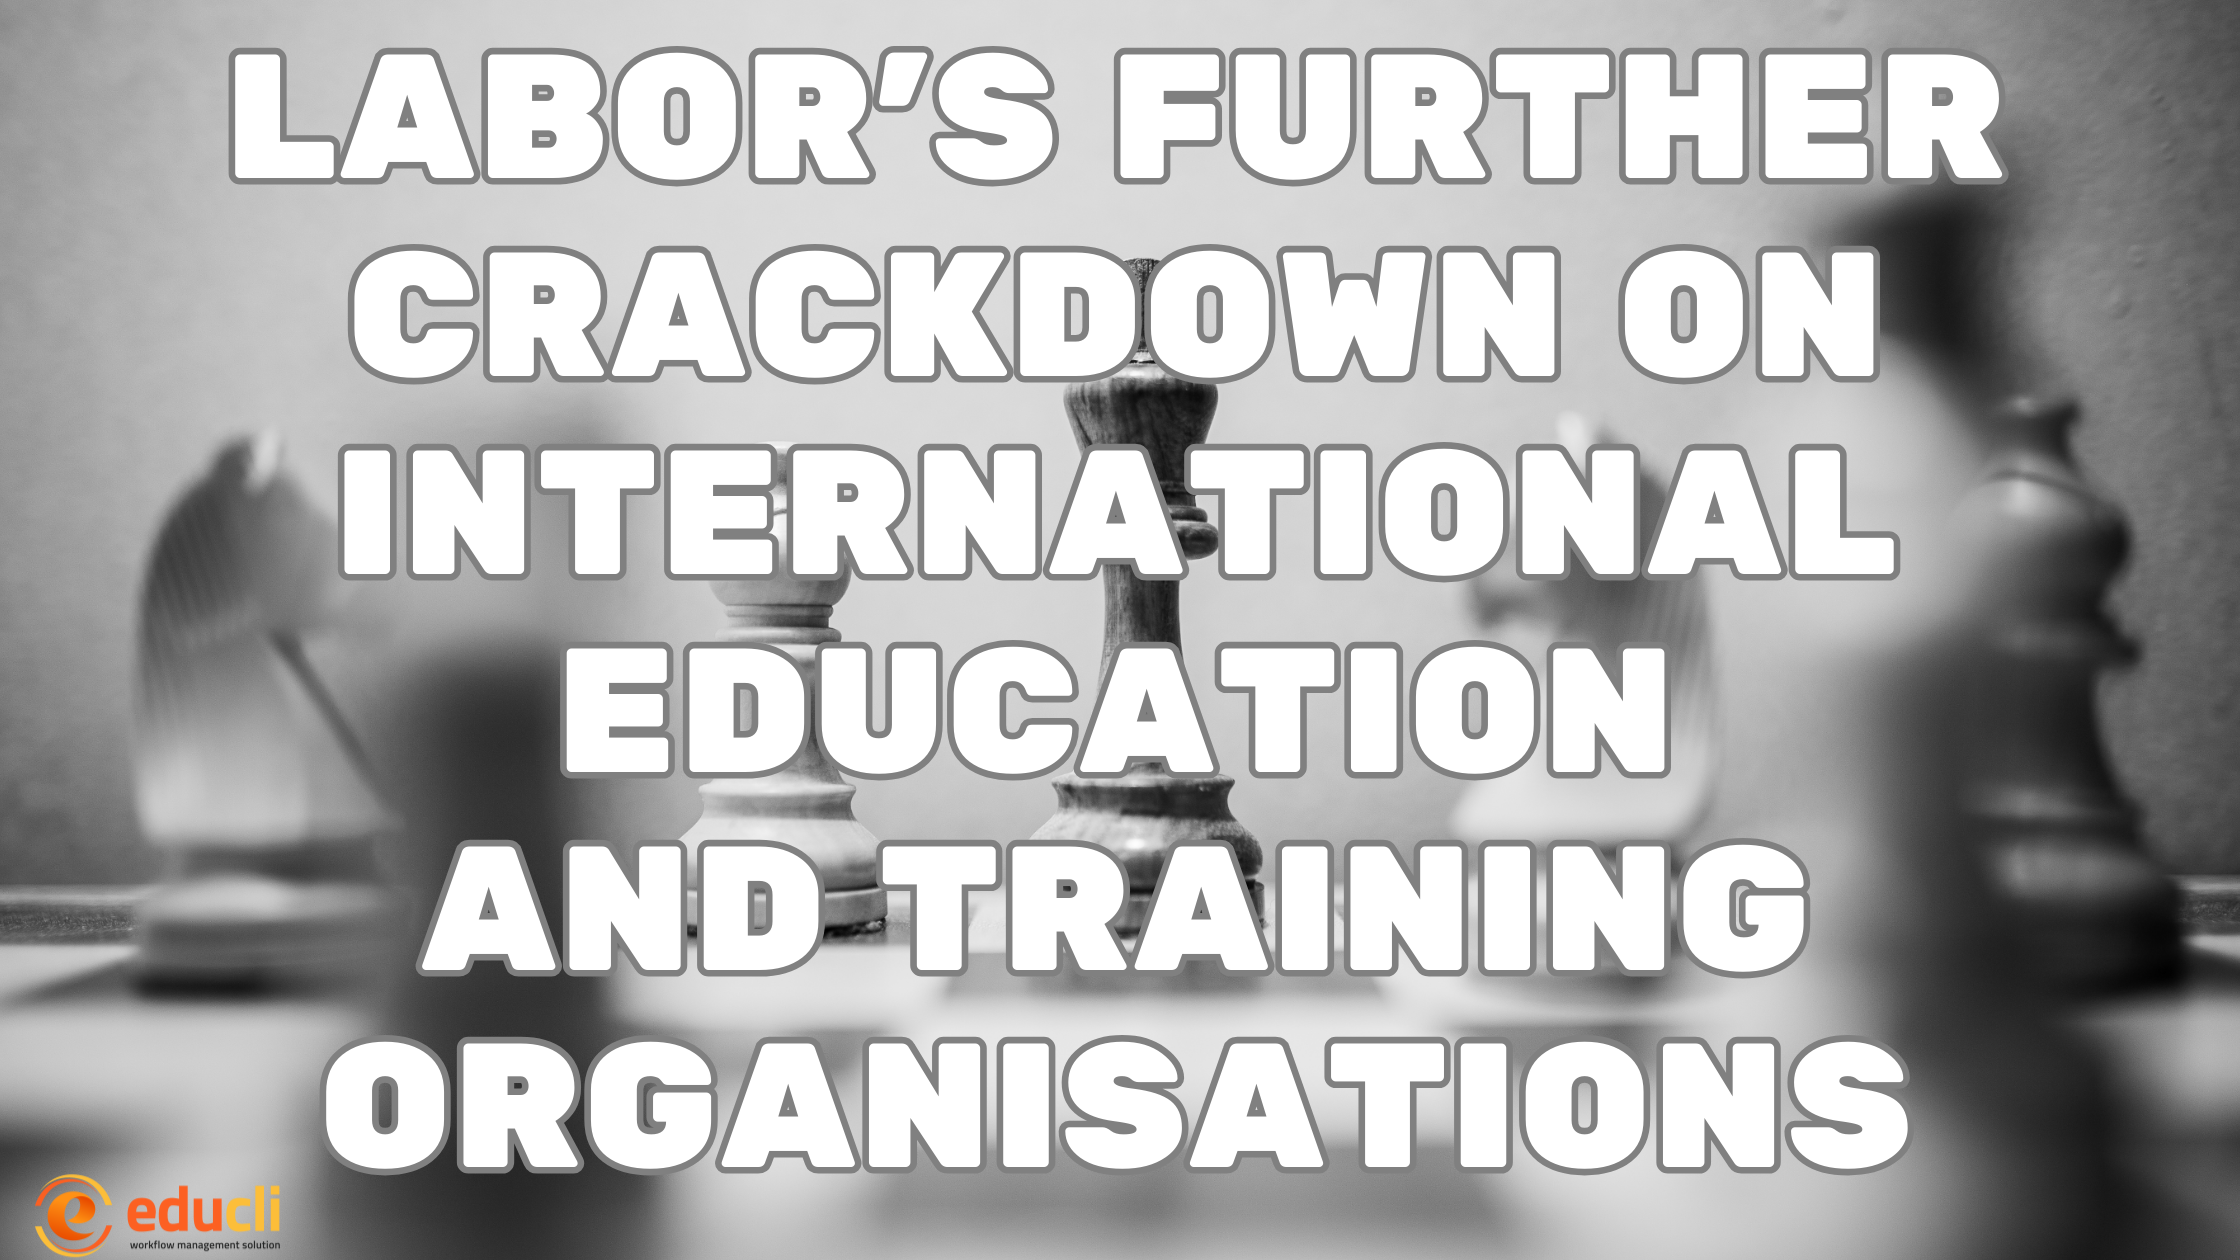 Labor’s further crackdown on international education and training organisations